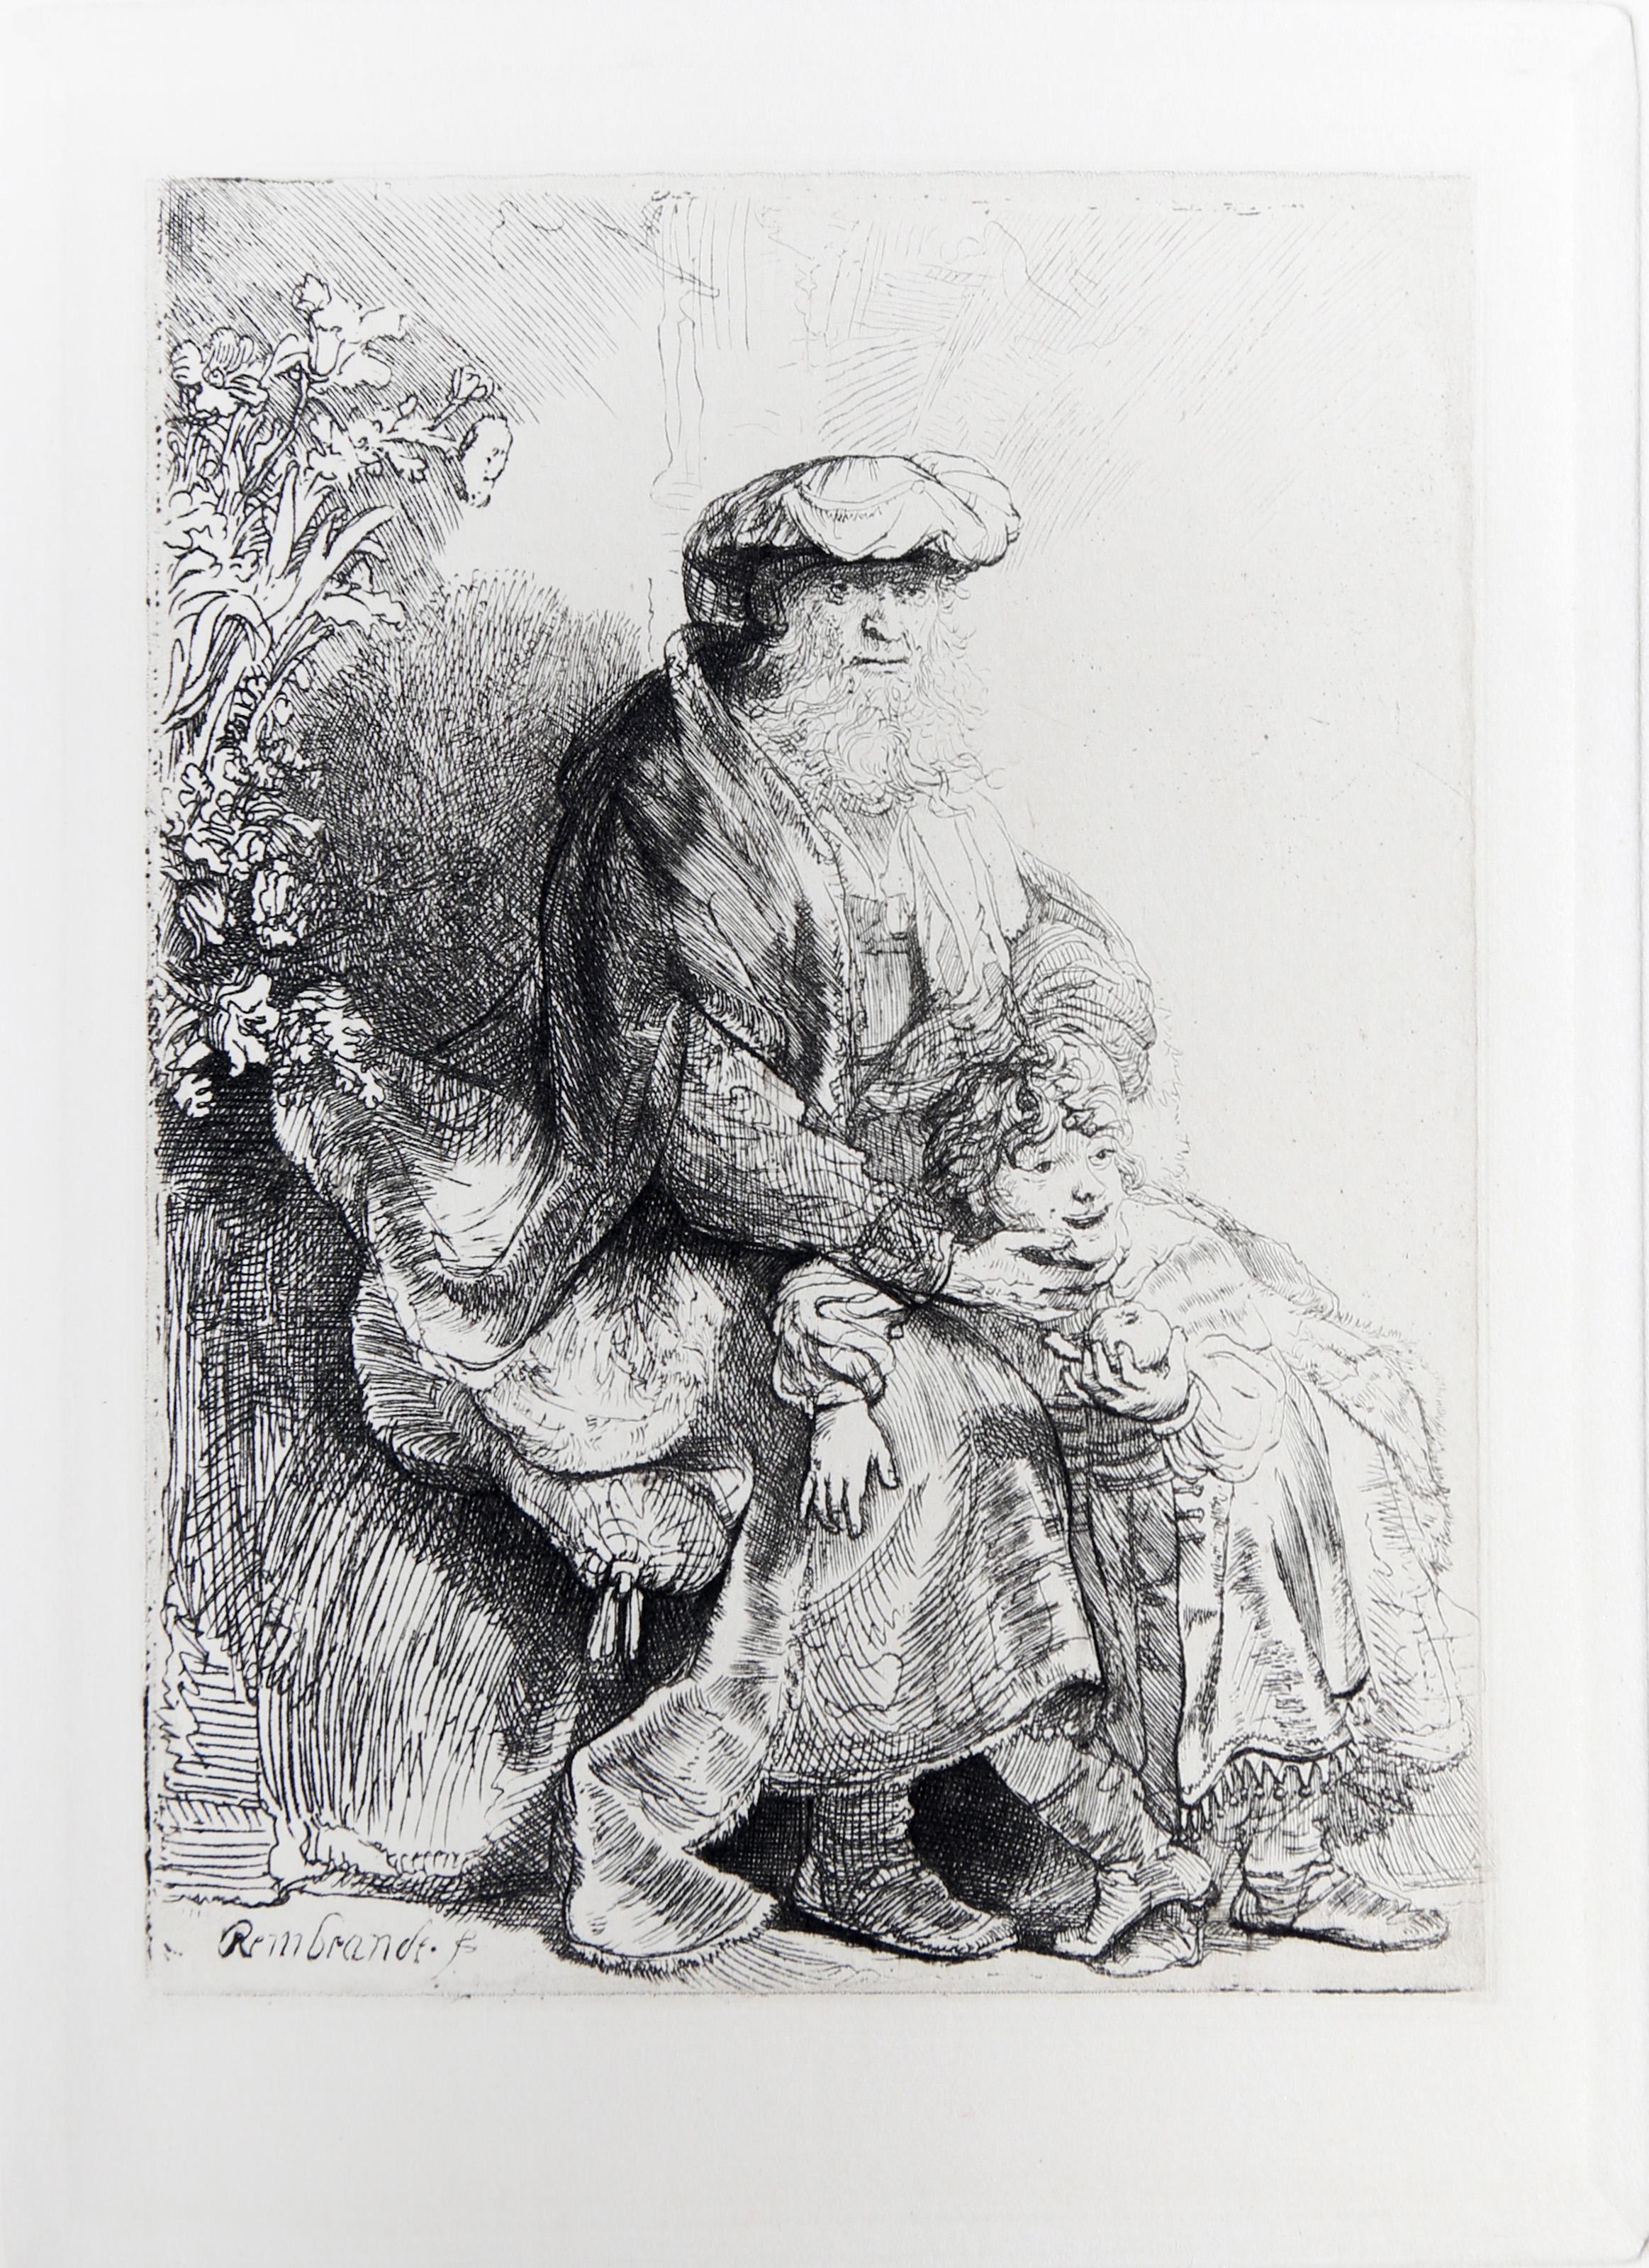  Rembrandt van Rijn, After by Amand Durand, Dutch (1606 - 1669) - Jacob Caressing Benjamin, Year: of Original: 1637, Medium: Etching, Image Size: 4.5 x 3.5 inches, Size: 12  x 10 in. (30.48  x 25.4 cm), Printer: Amand Durand, Reference: Bartsch 33,